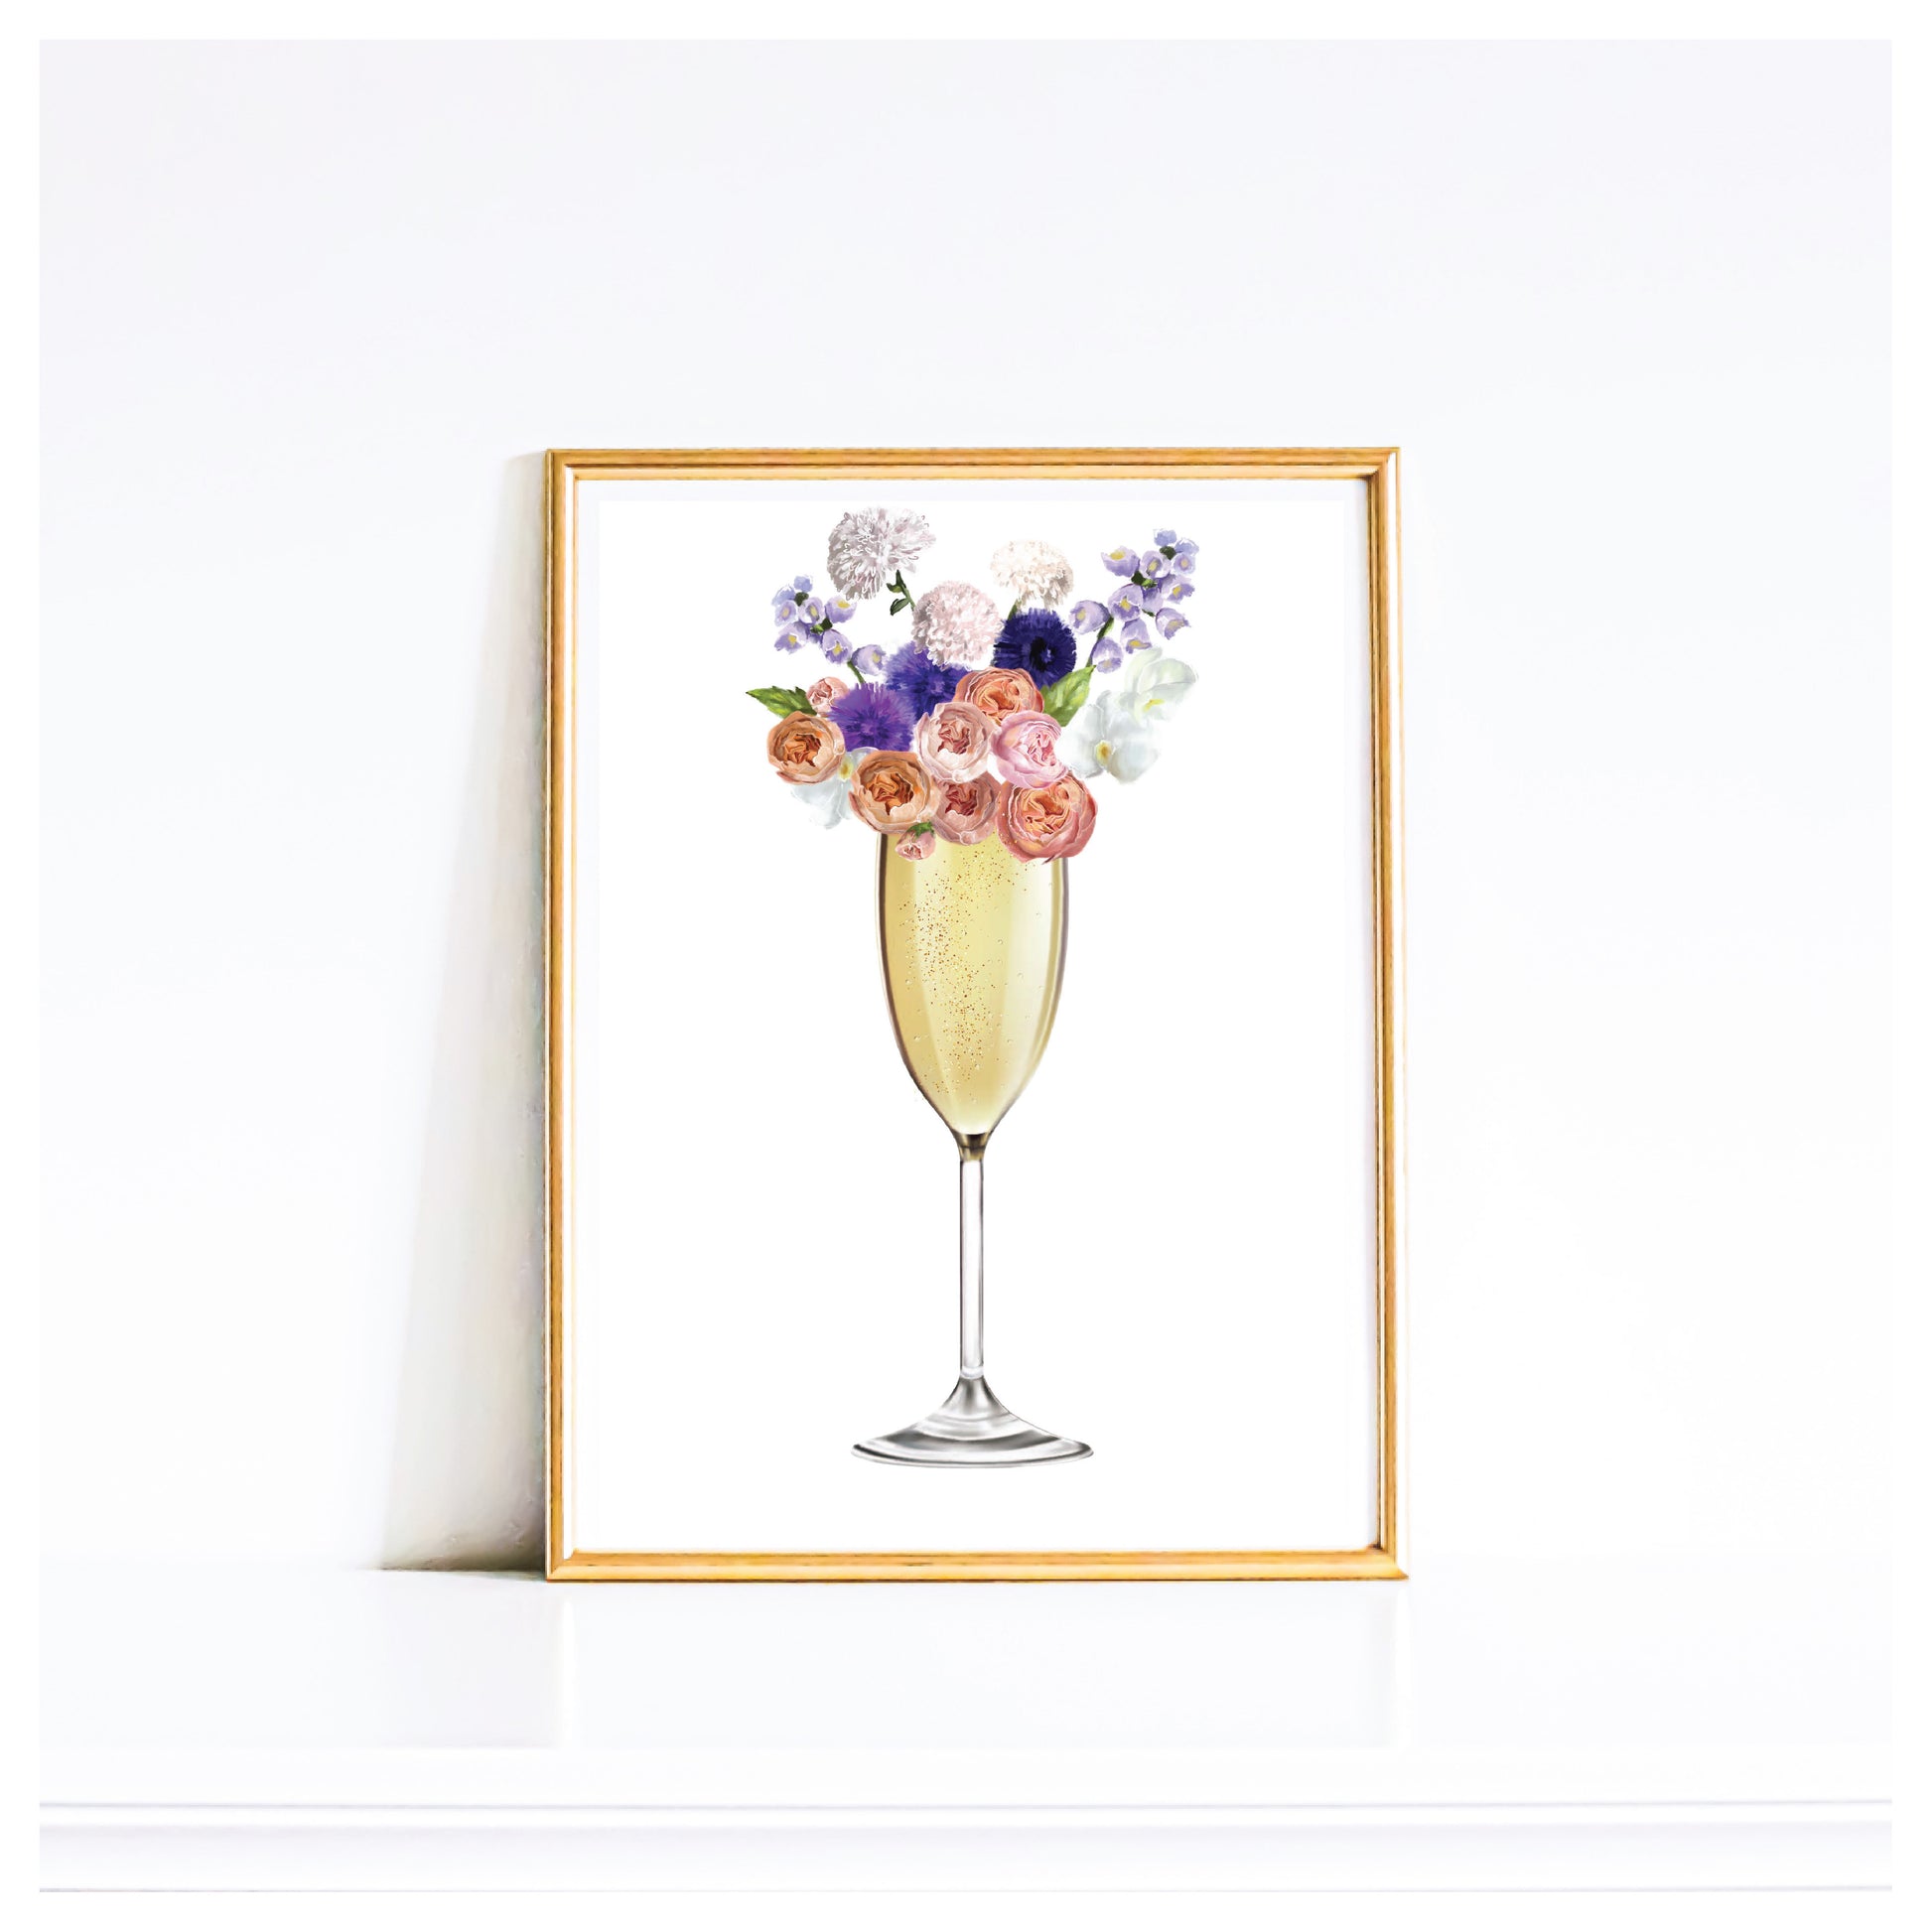 Champagne Glass with Flowers, 8" x 10" Art Print - Gallery360 Designs